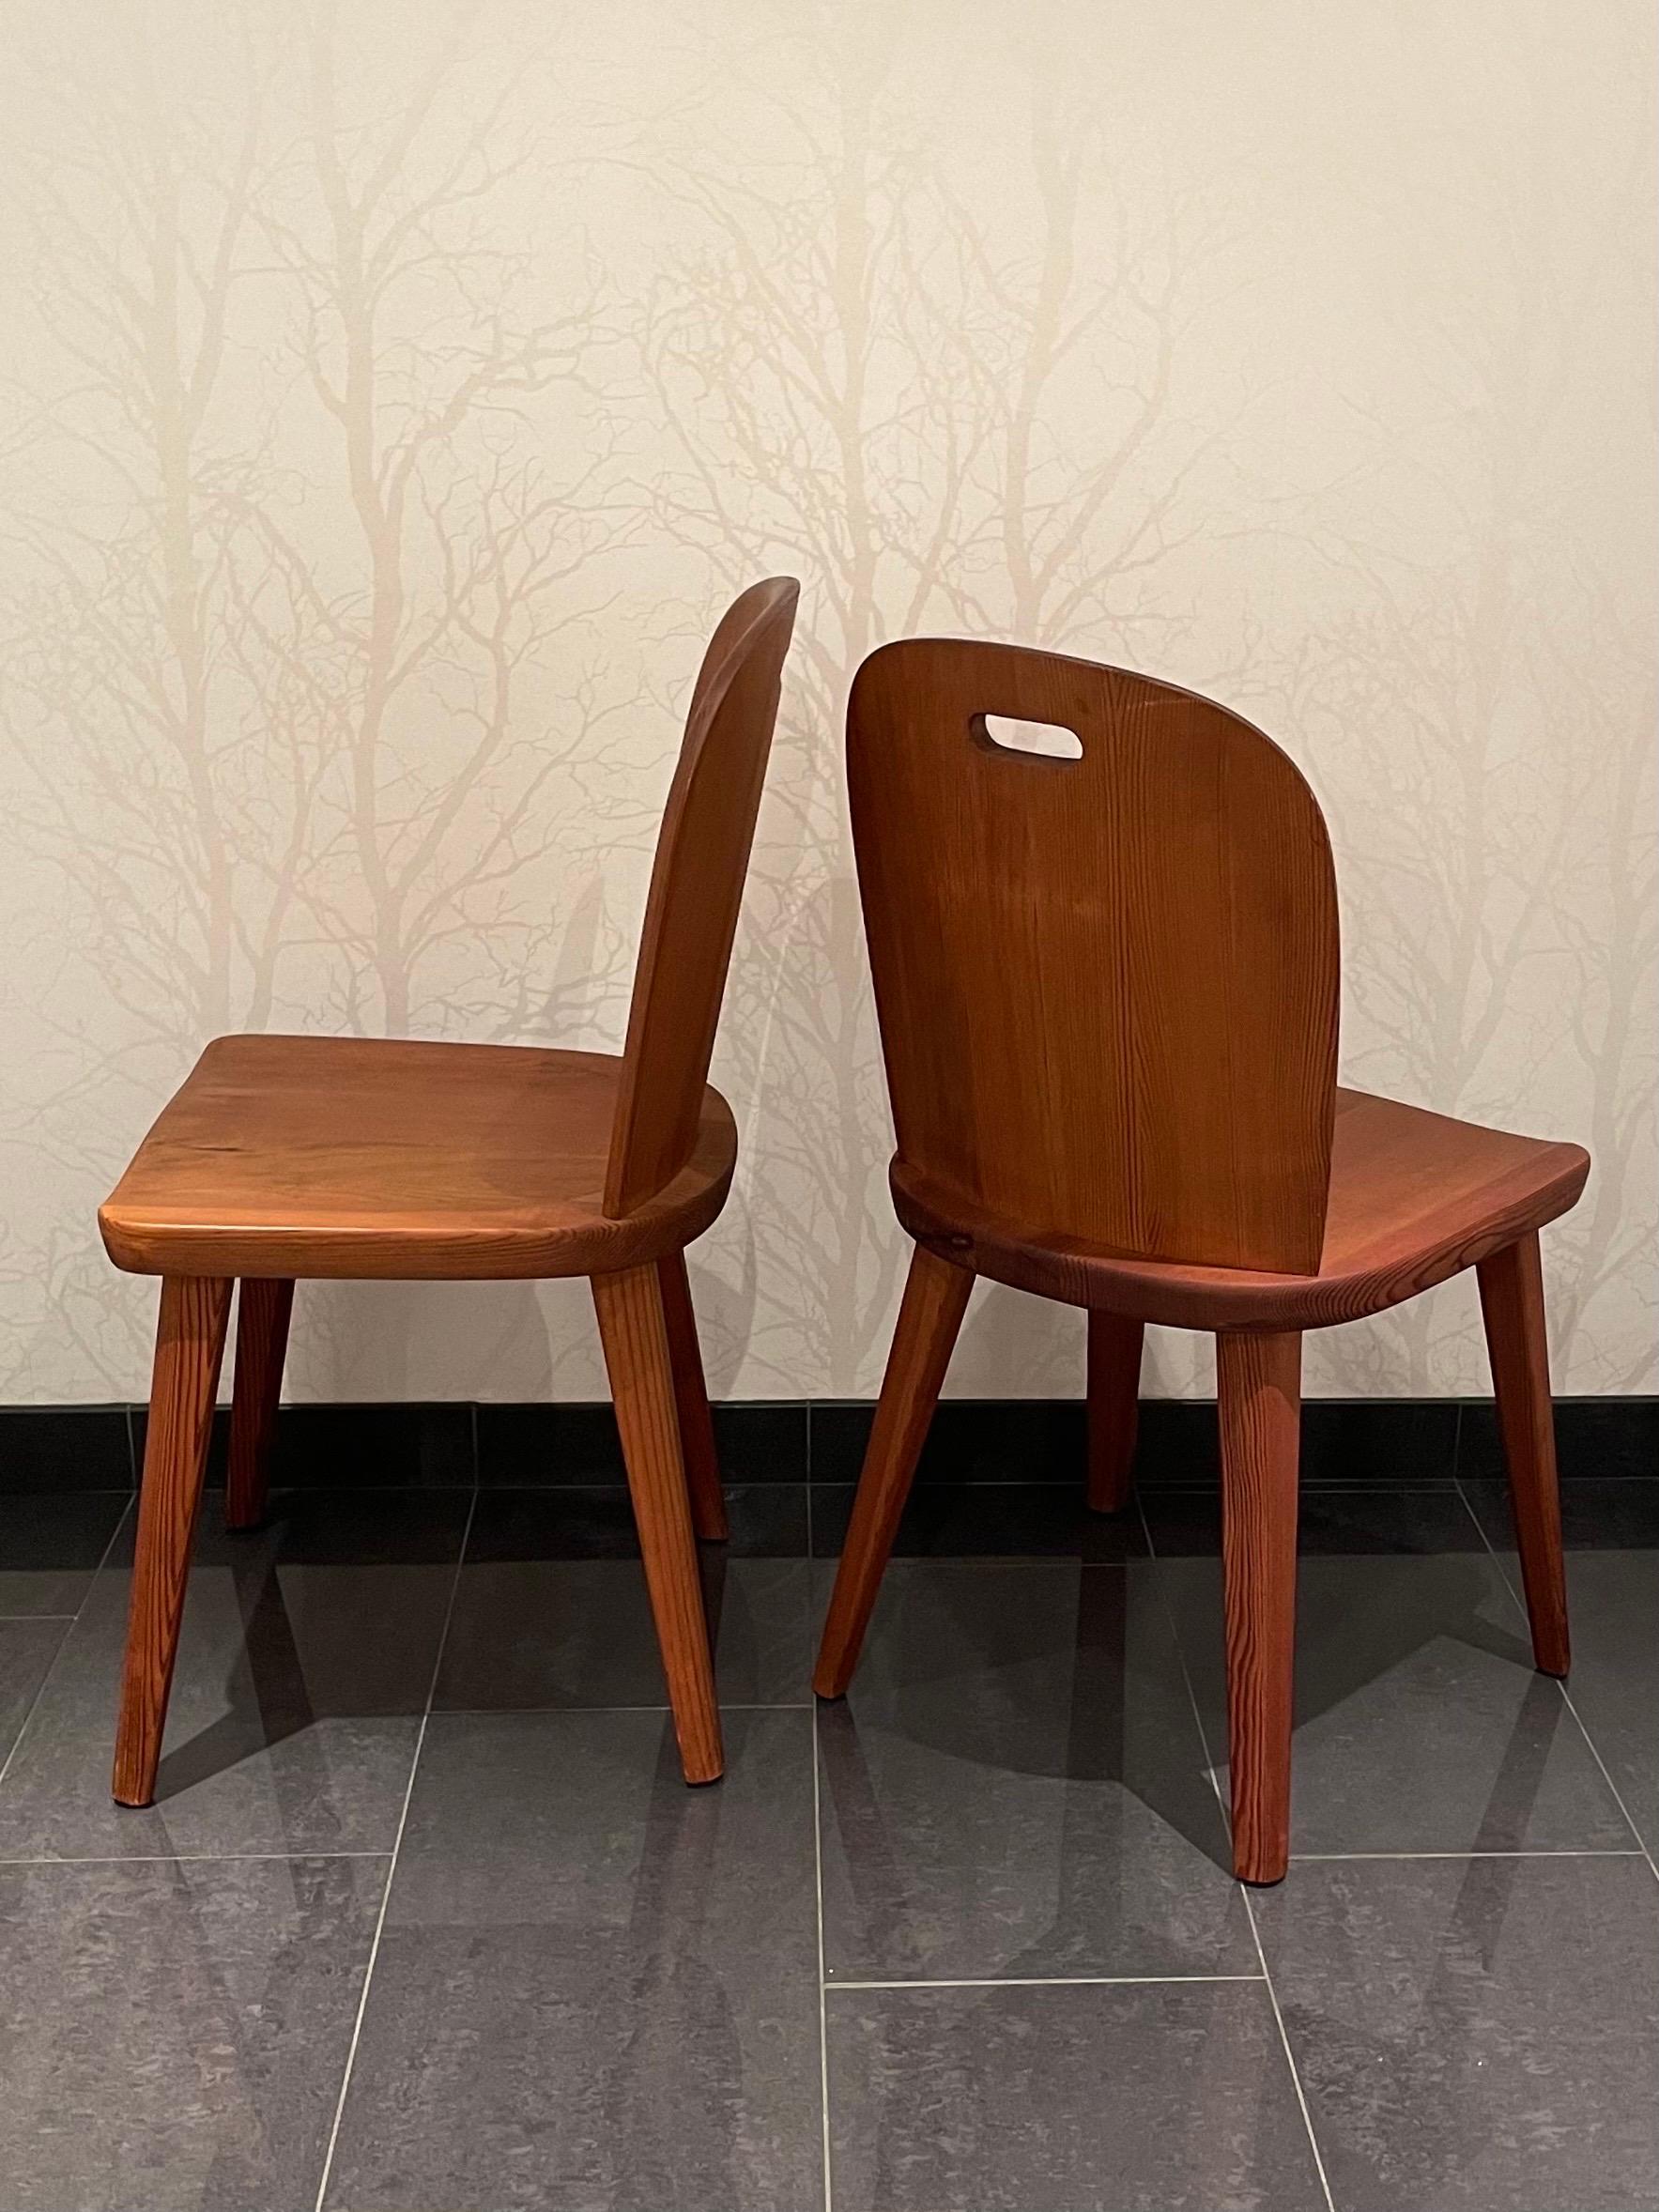 Scandinavian Modern 1930s Sport Cabin Solid Pine Chairs in Axel Einar Hjorth Style by Åby Möbler  For Sale